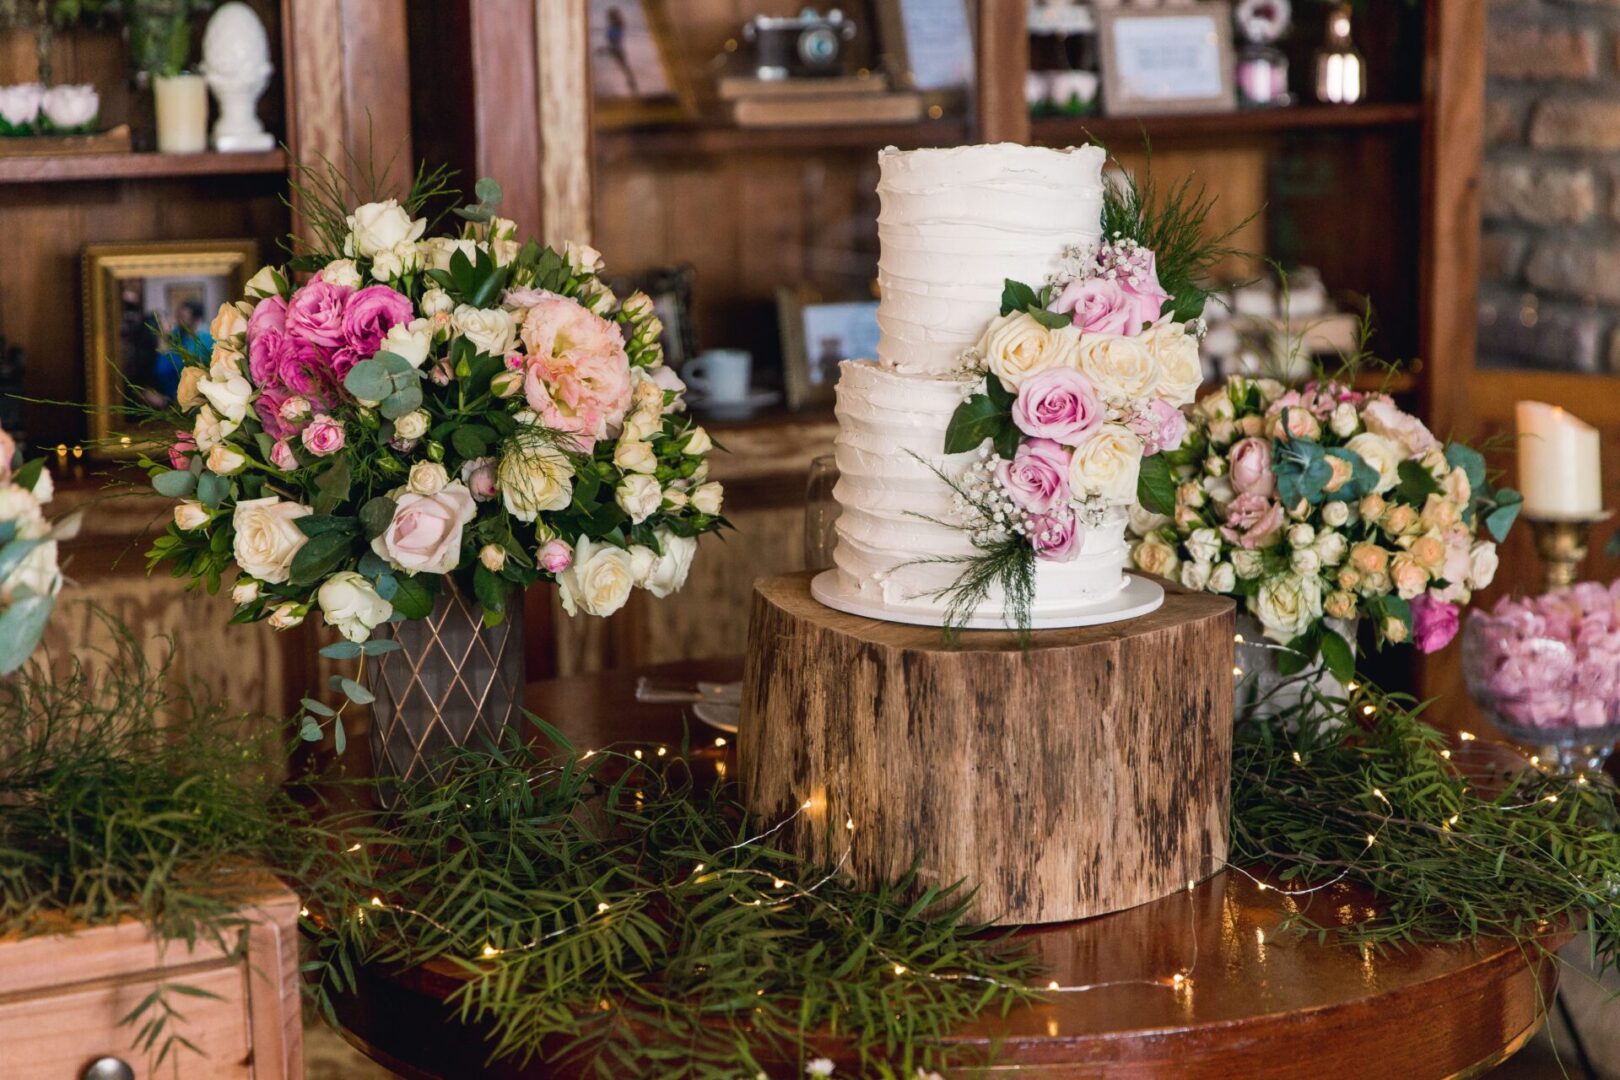 Beautiful wedding cake and flowers on a table